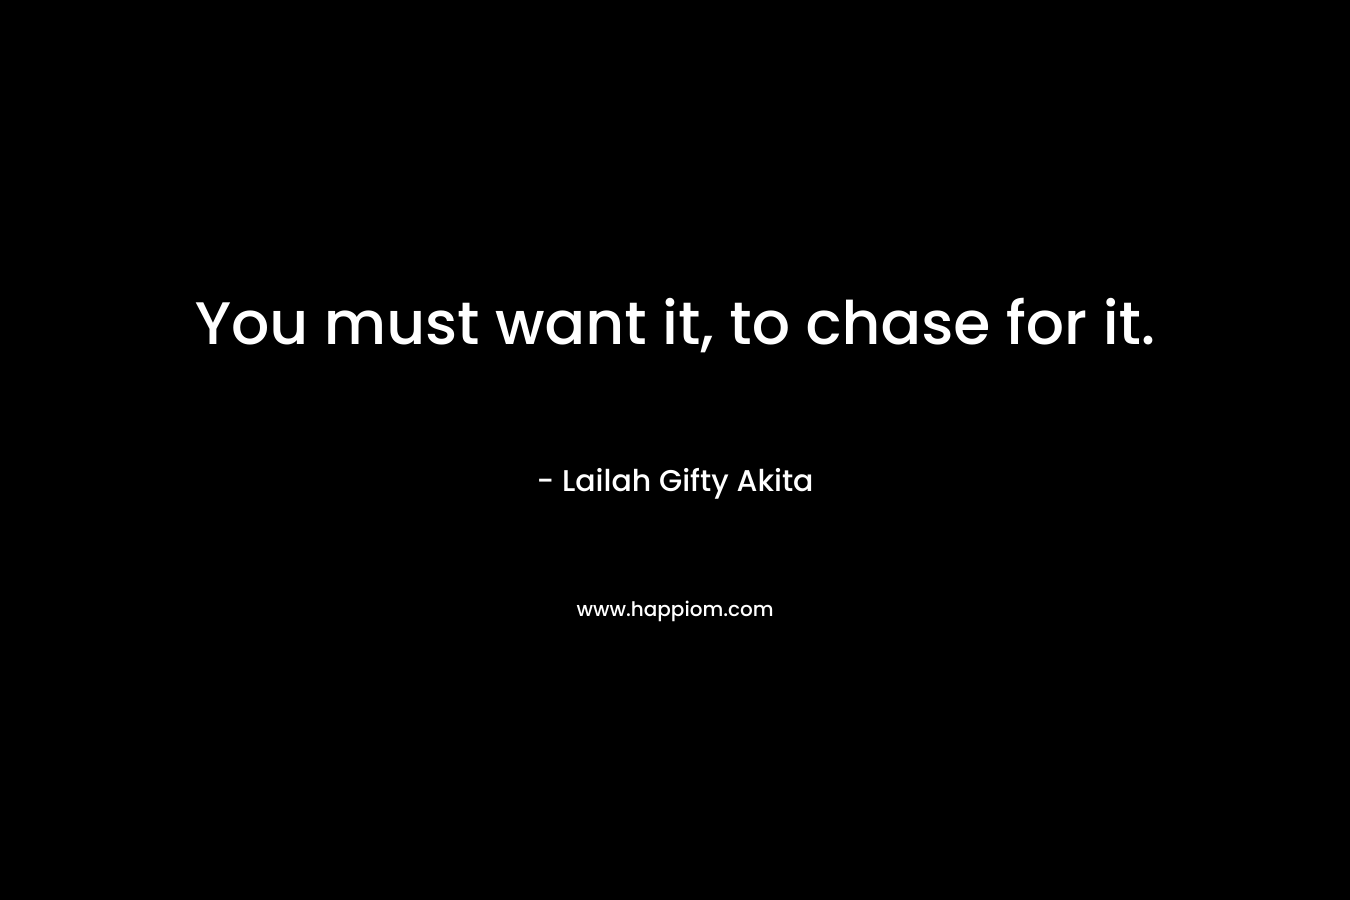 You must want it, to chase for it.